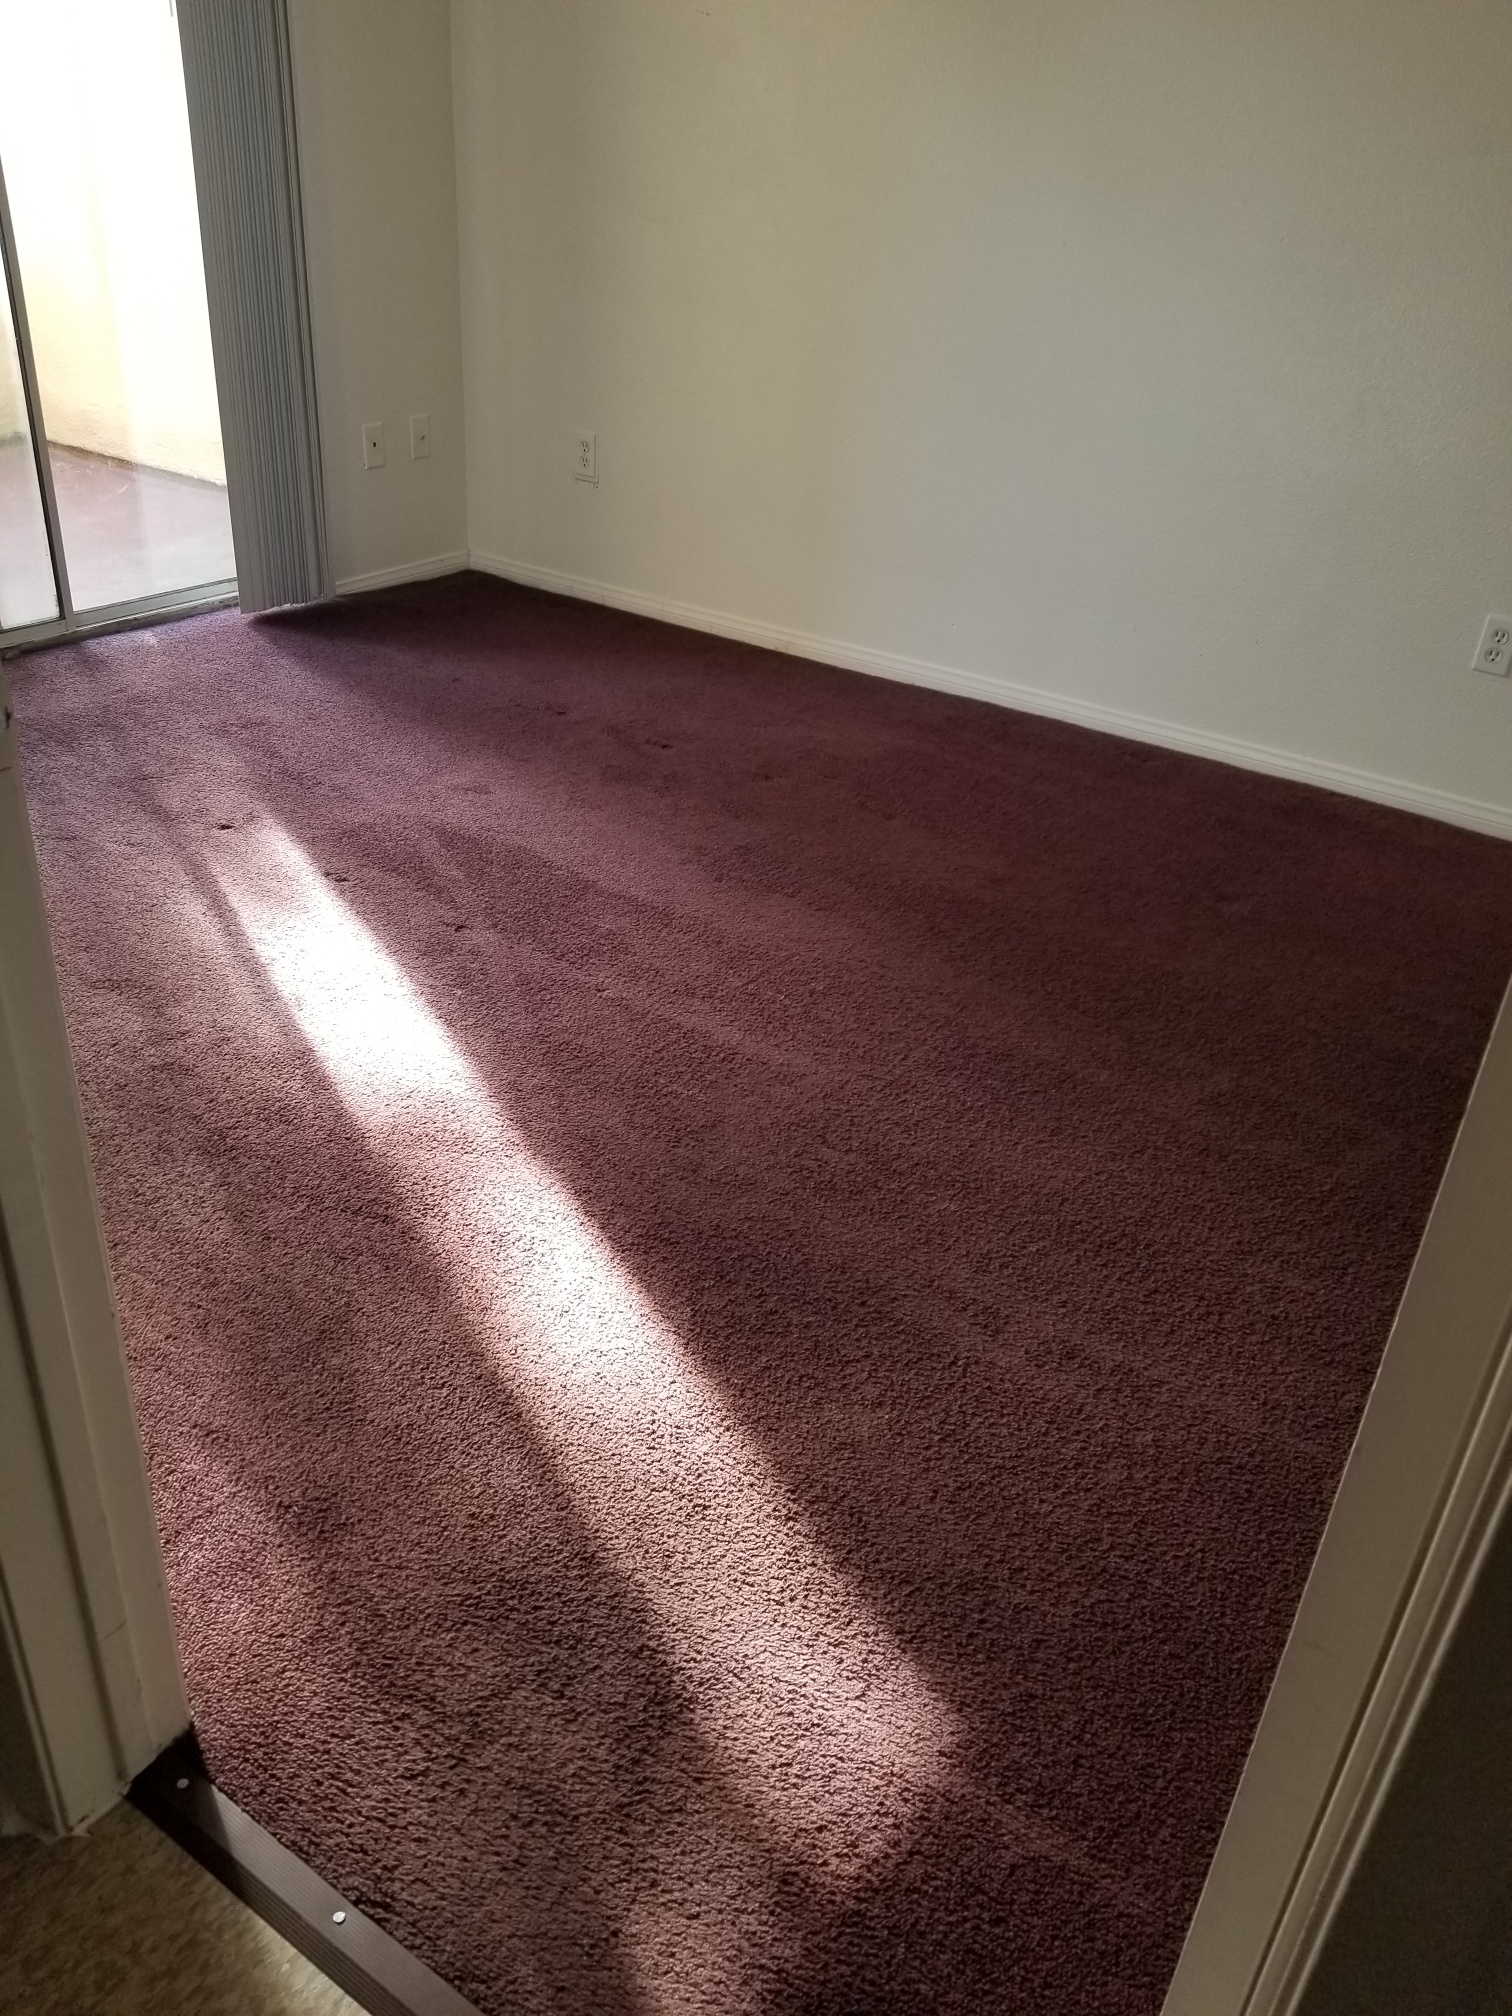 view of a bedroom at Willow Tree Village. Room has burgandy carpet. Patio access